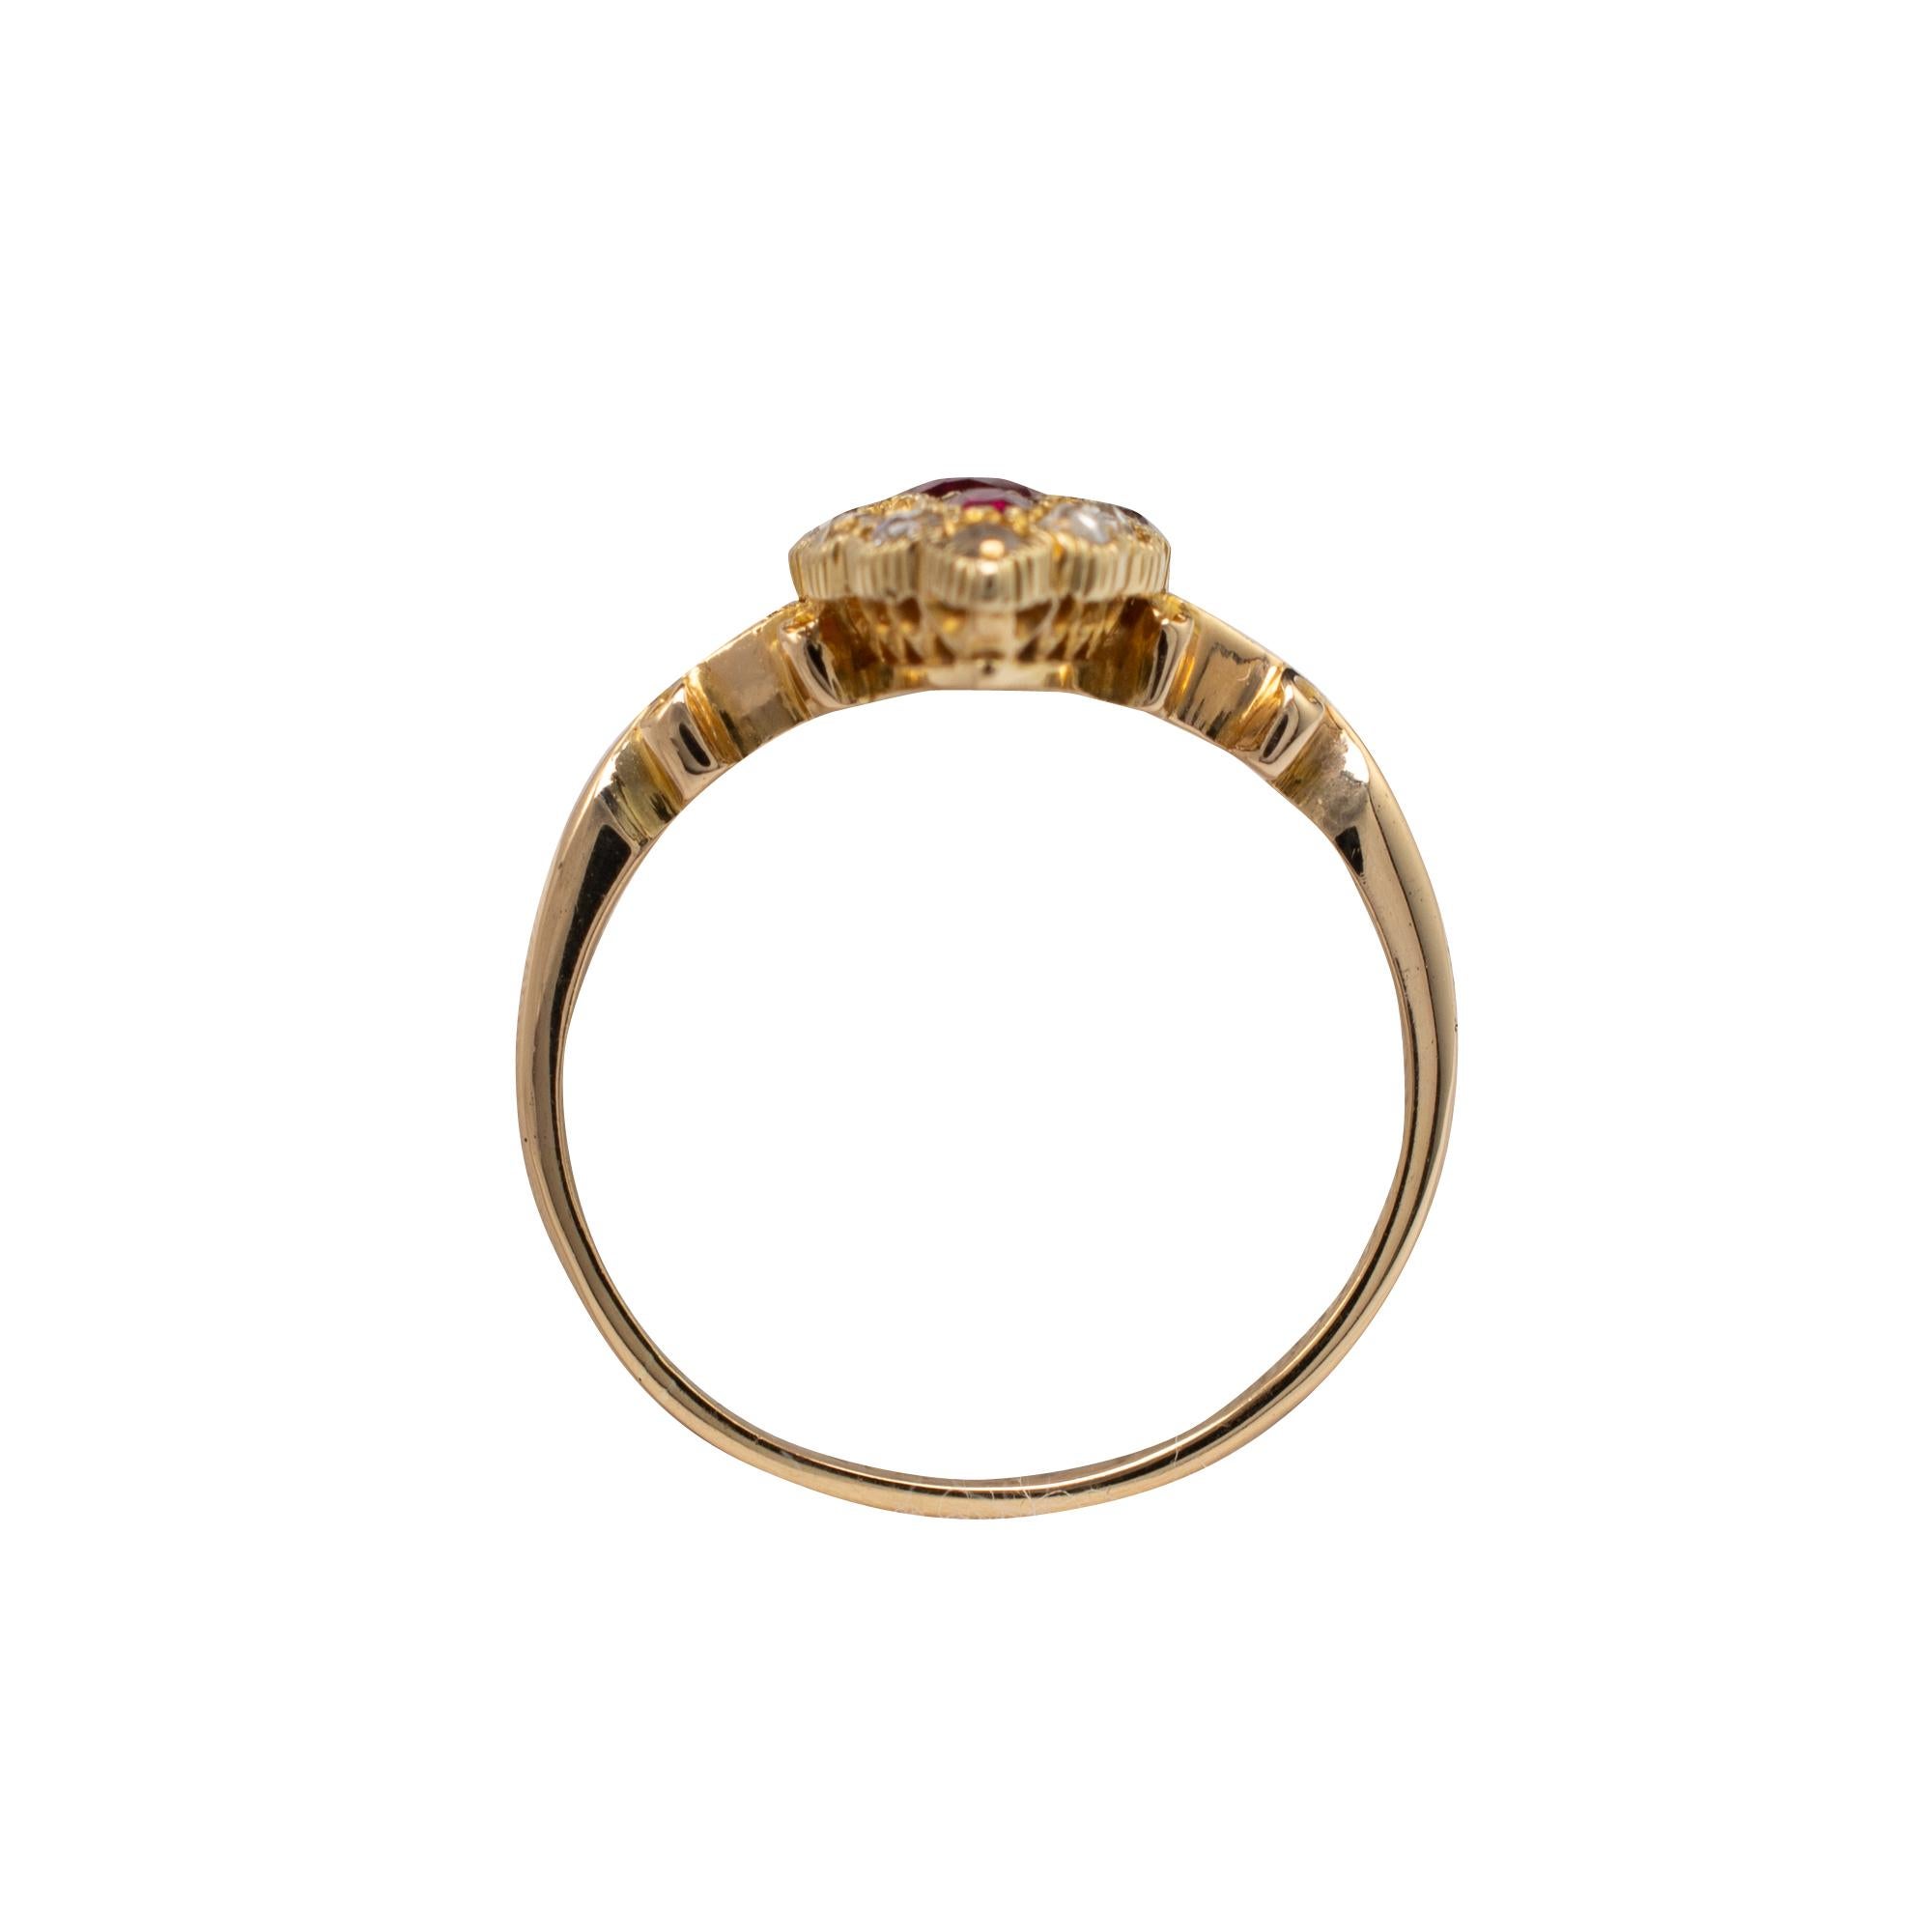 Antique Marquise Ring Ruby and Diamond Ring, 18 Karat Gold Chester Hallmarks 1